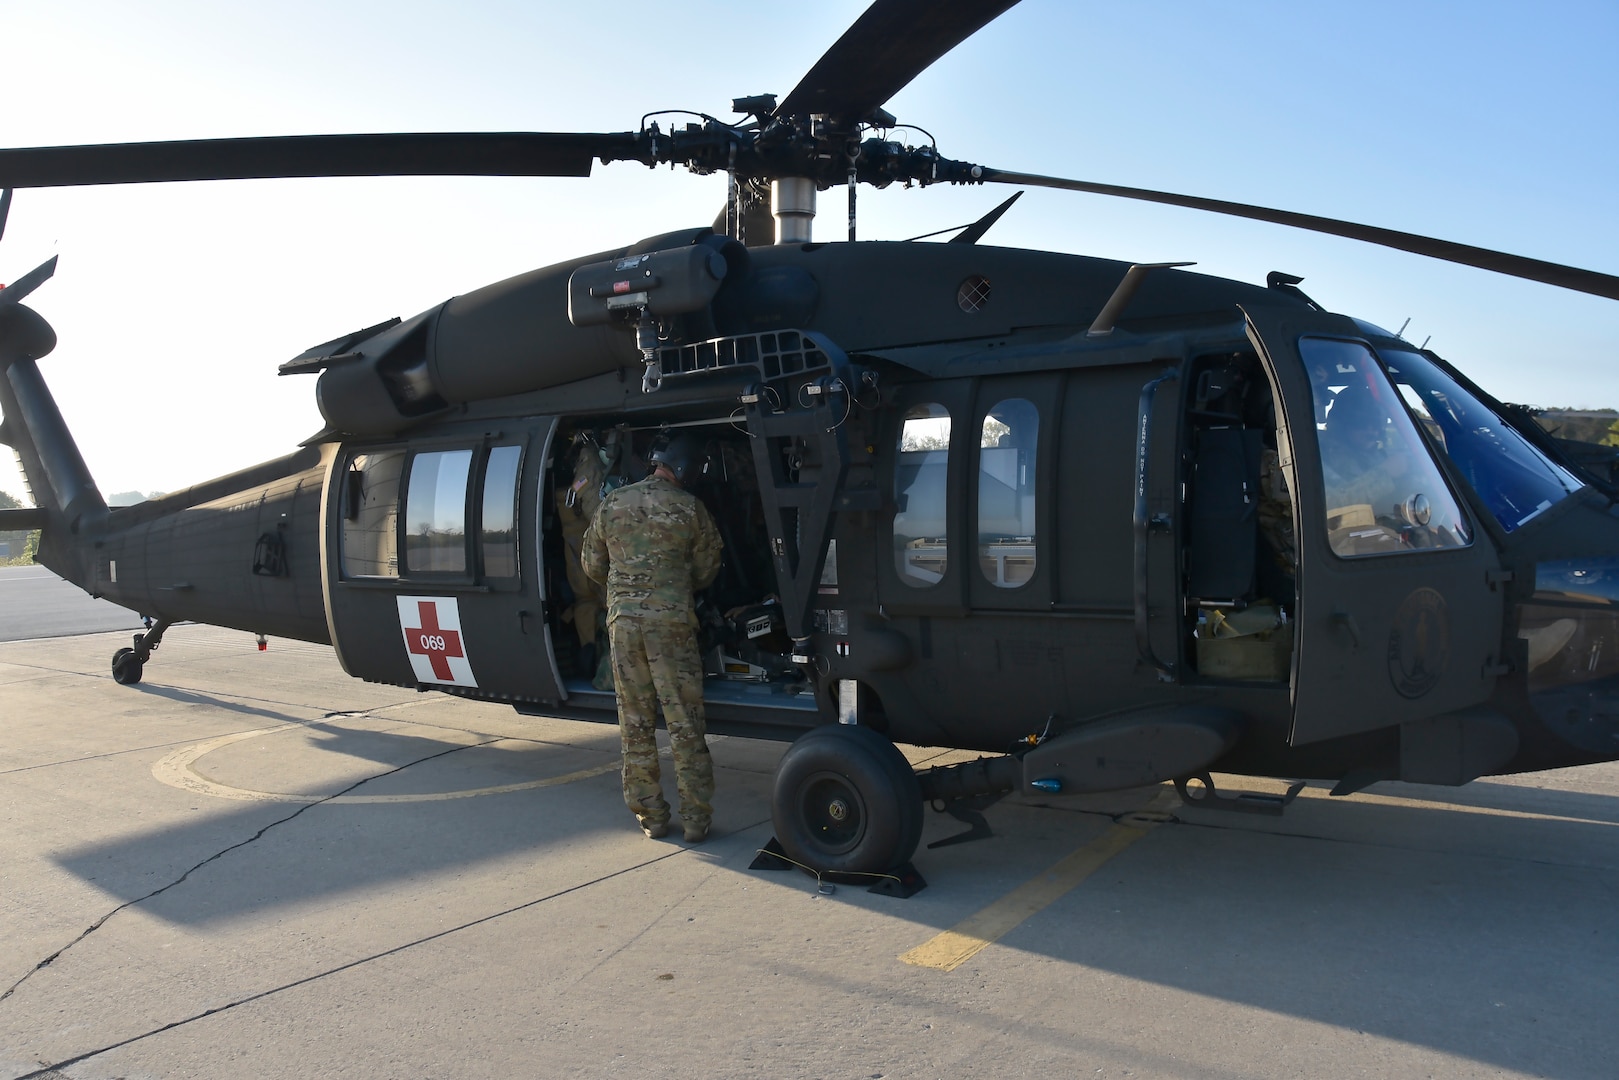 Approximately two dozen Soldiers assigned to medevac units at the Wisconsin National Guard's Army Aviation Support Facility 1 in West Bend, Wis., prep UH-60 Black Hawk helicopters Sept. 14, 20128, for movement to Maryland in response to Hurricane Florence, where the crews will remain in a standby status to be available in the event that civil authorities request their services. Crews are enroute to Florida now for Hurricane Michael relief.